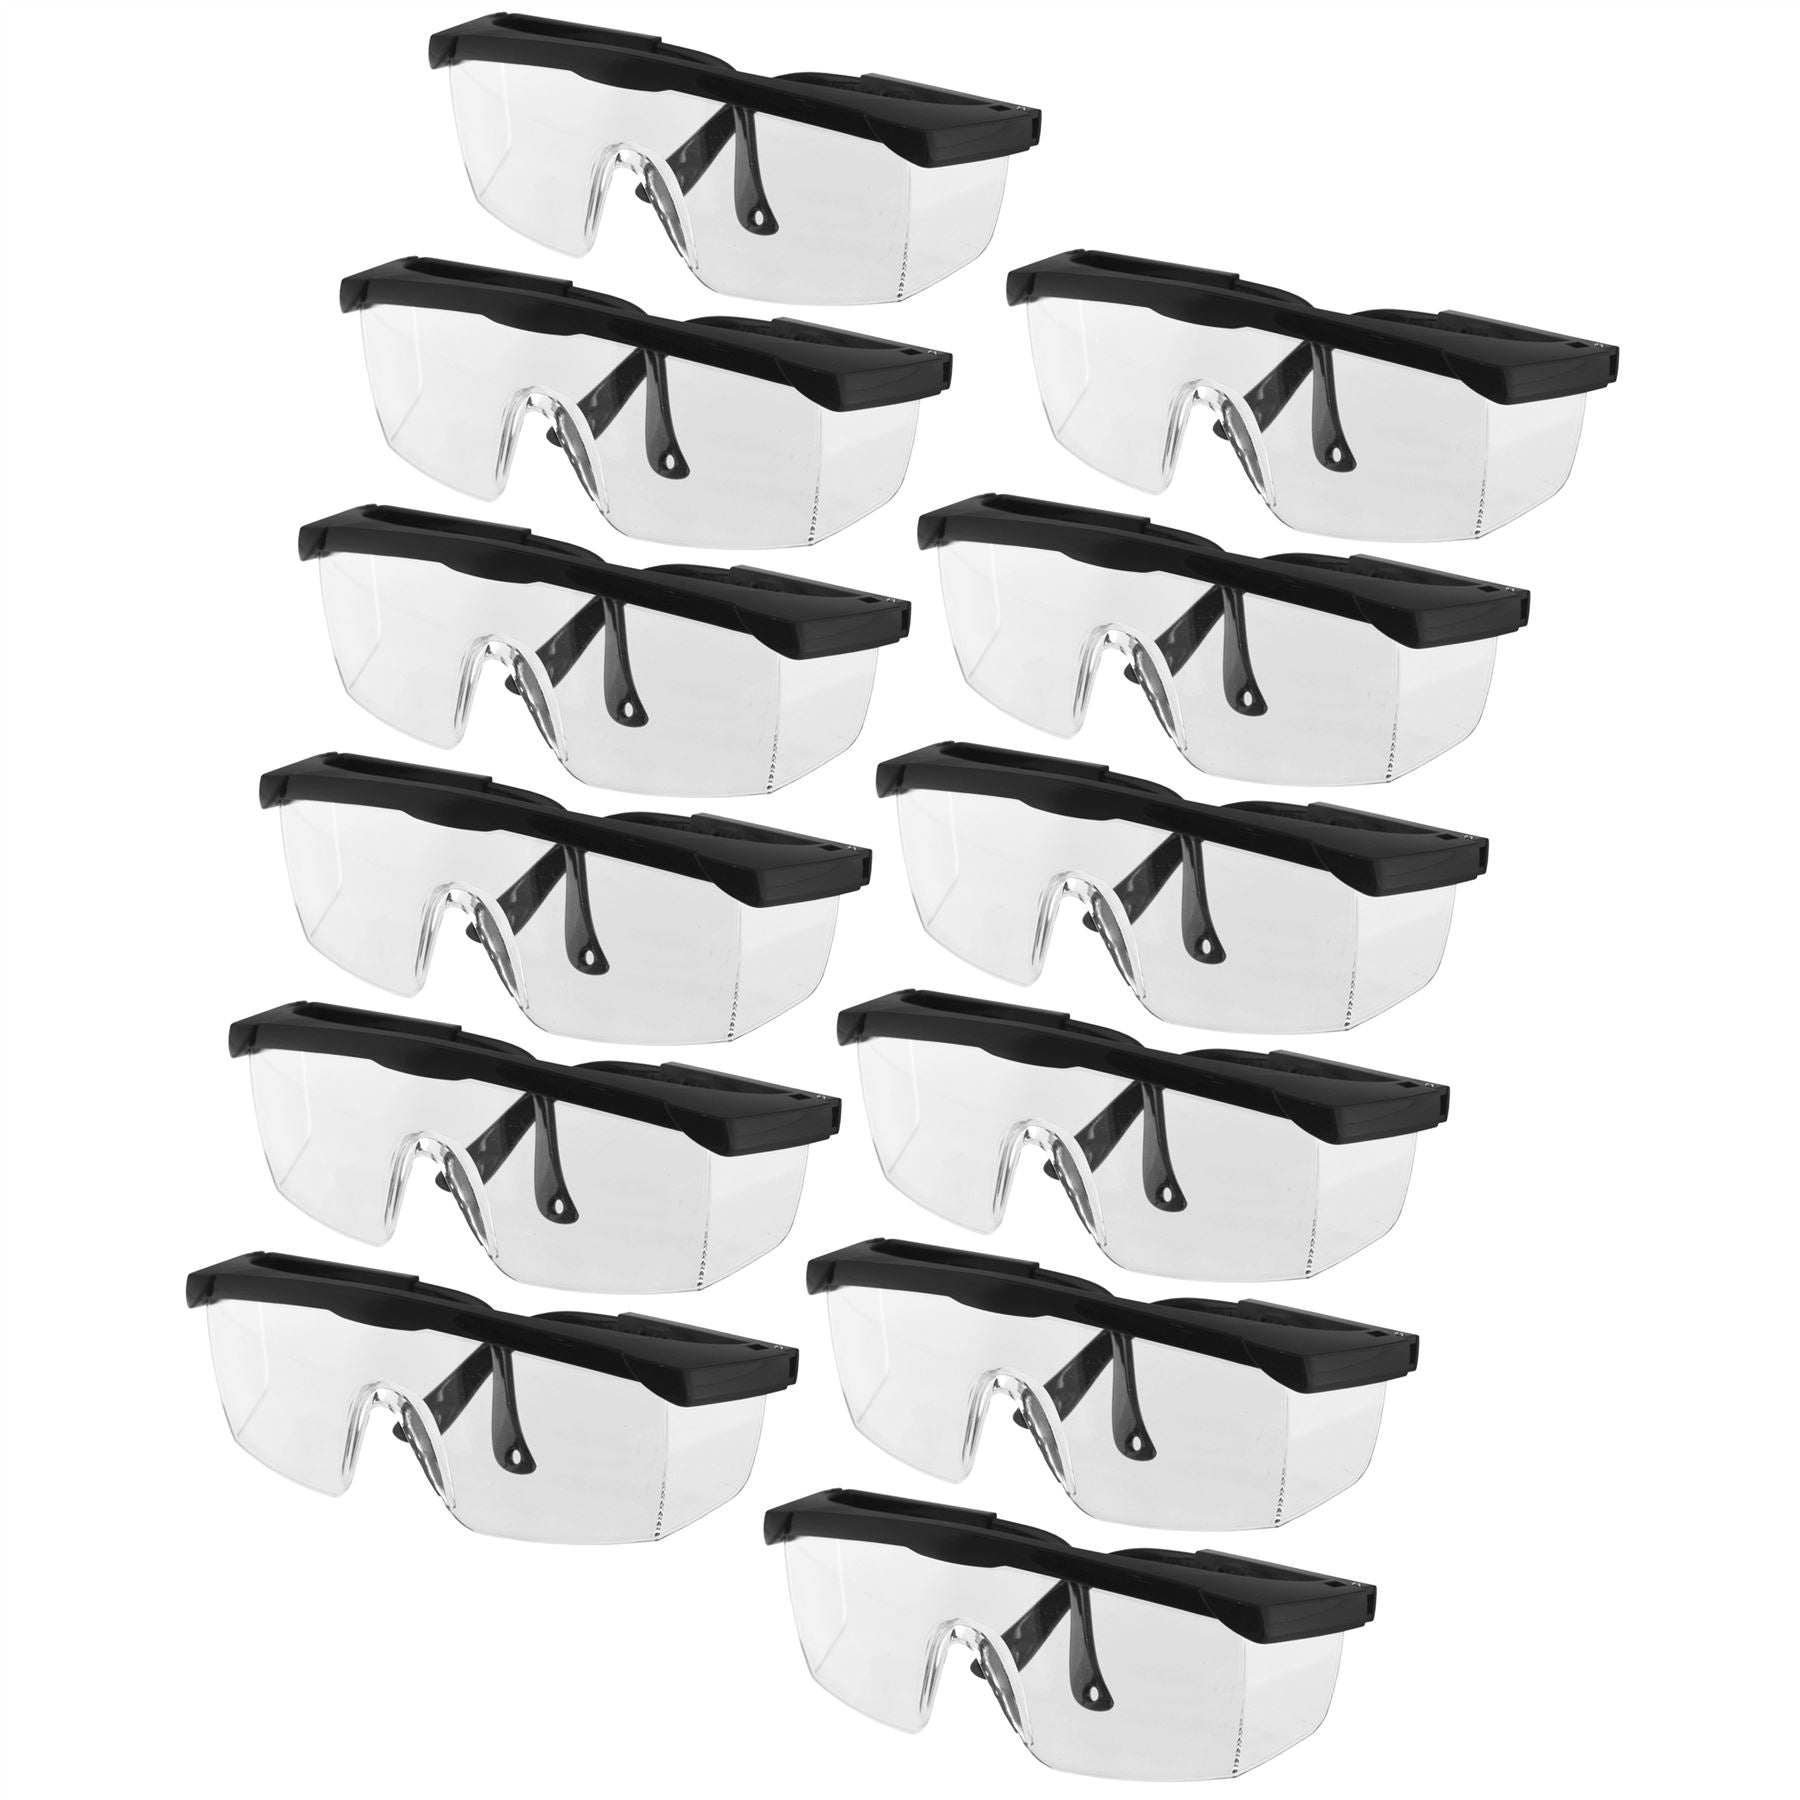 12 Pairs of Adjustable Safety Glasses Specs Safety Eye Protection Bergen